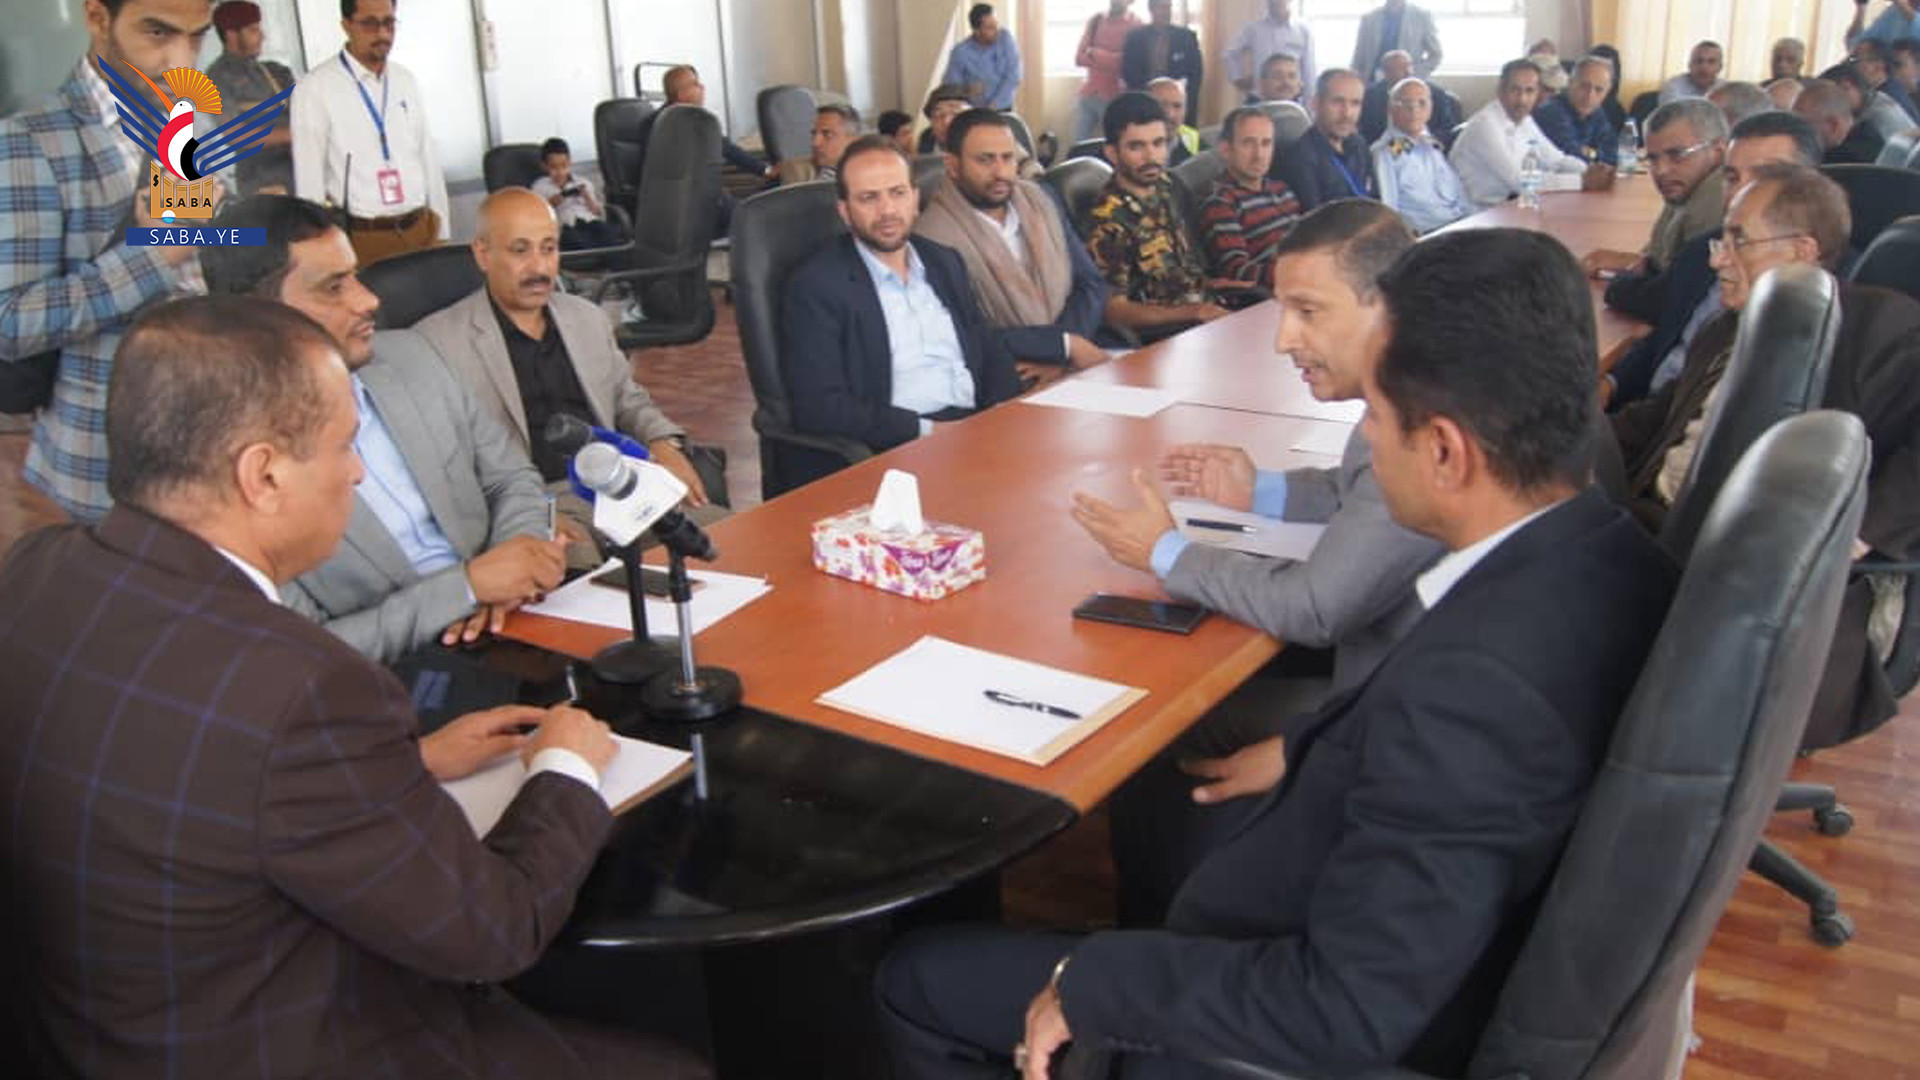 First flight from Sana'a airport to take off Monday: Minister